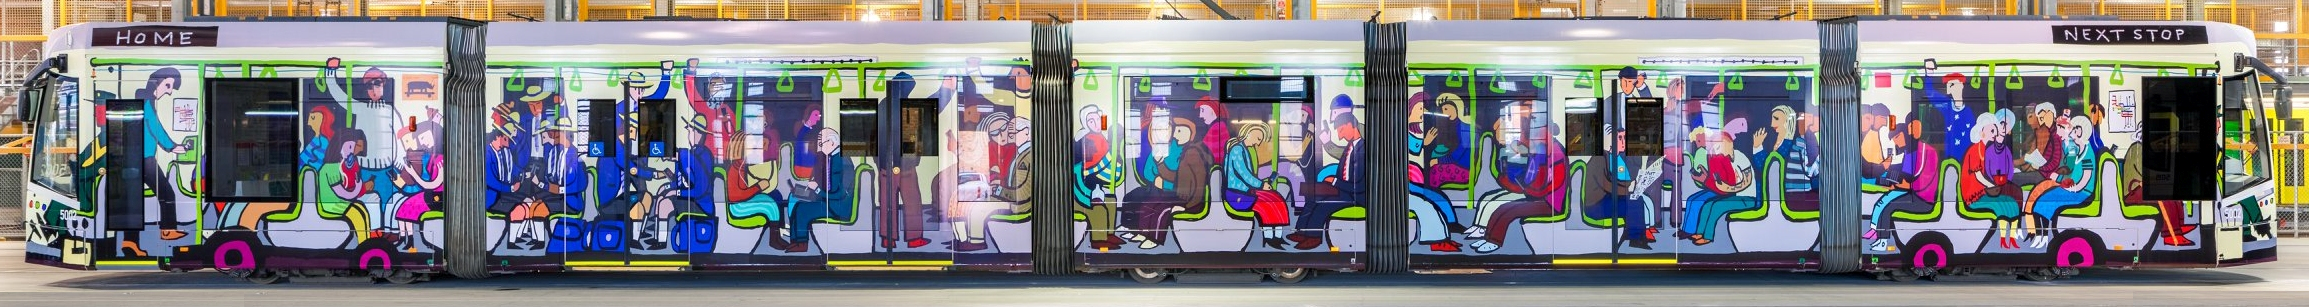 Melbourne painted tram